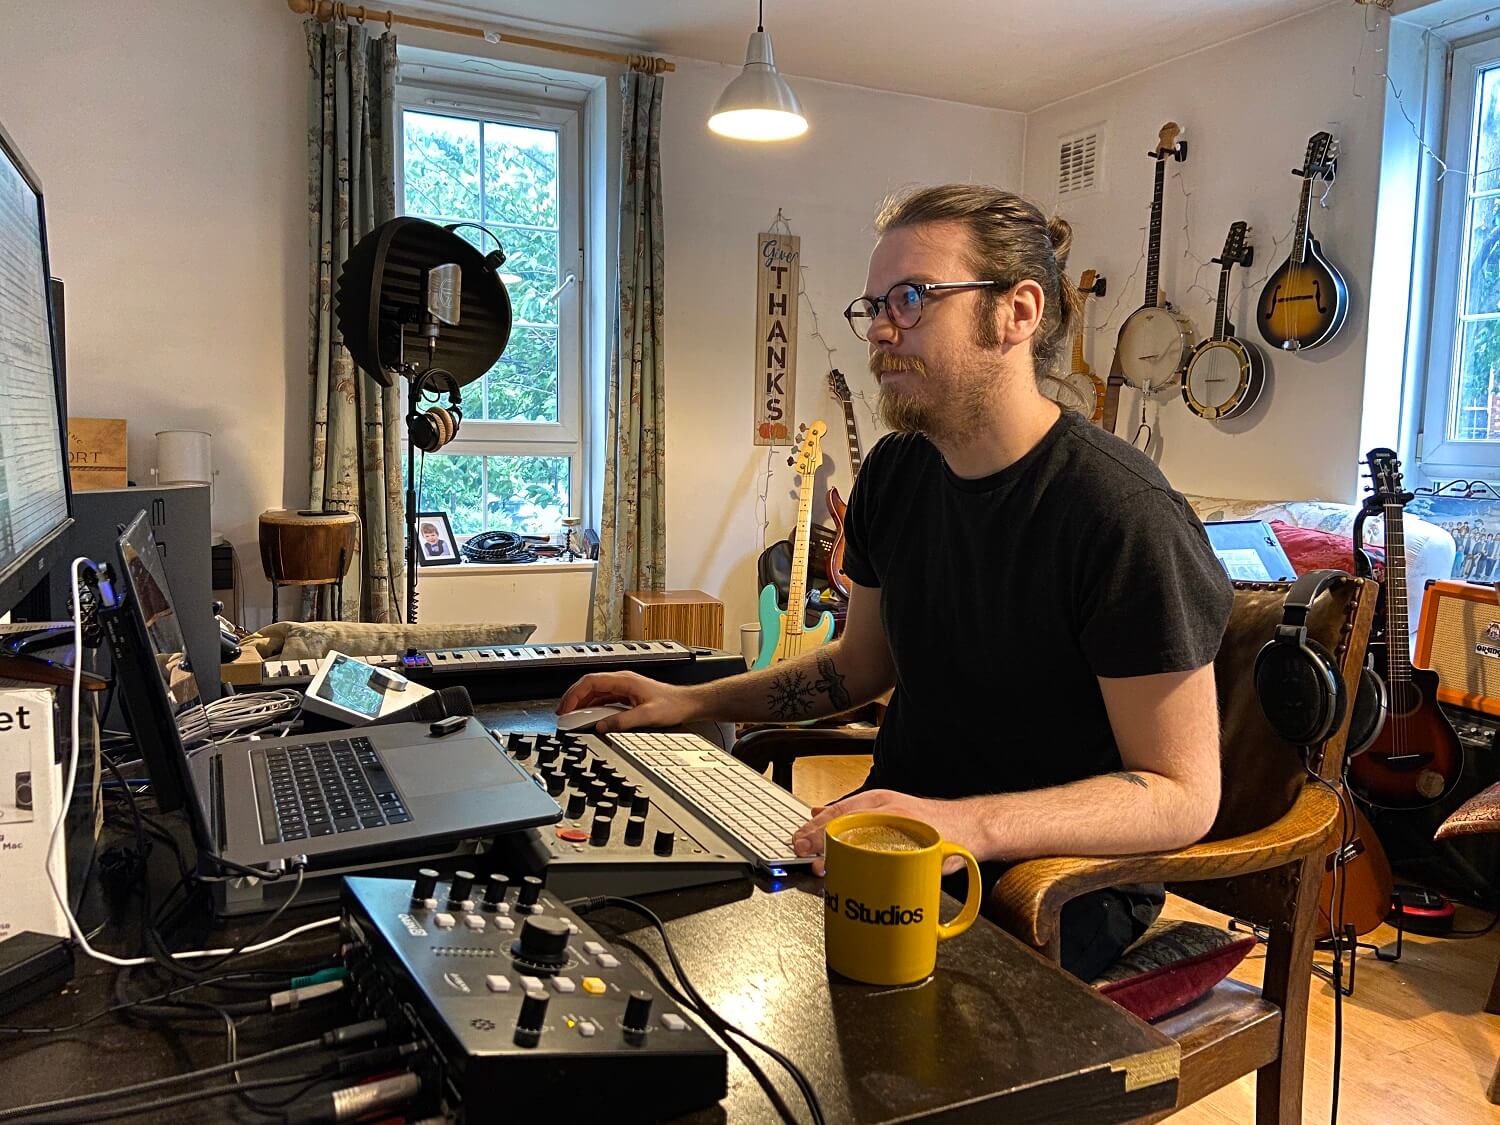 Man sits at desk with computer and lots of studio gear - and a cup of tea